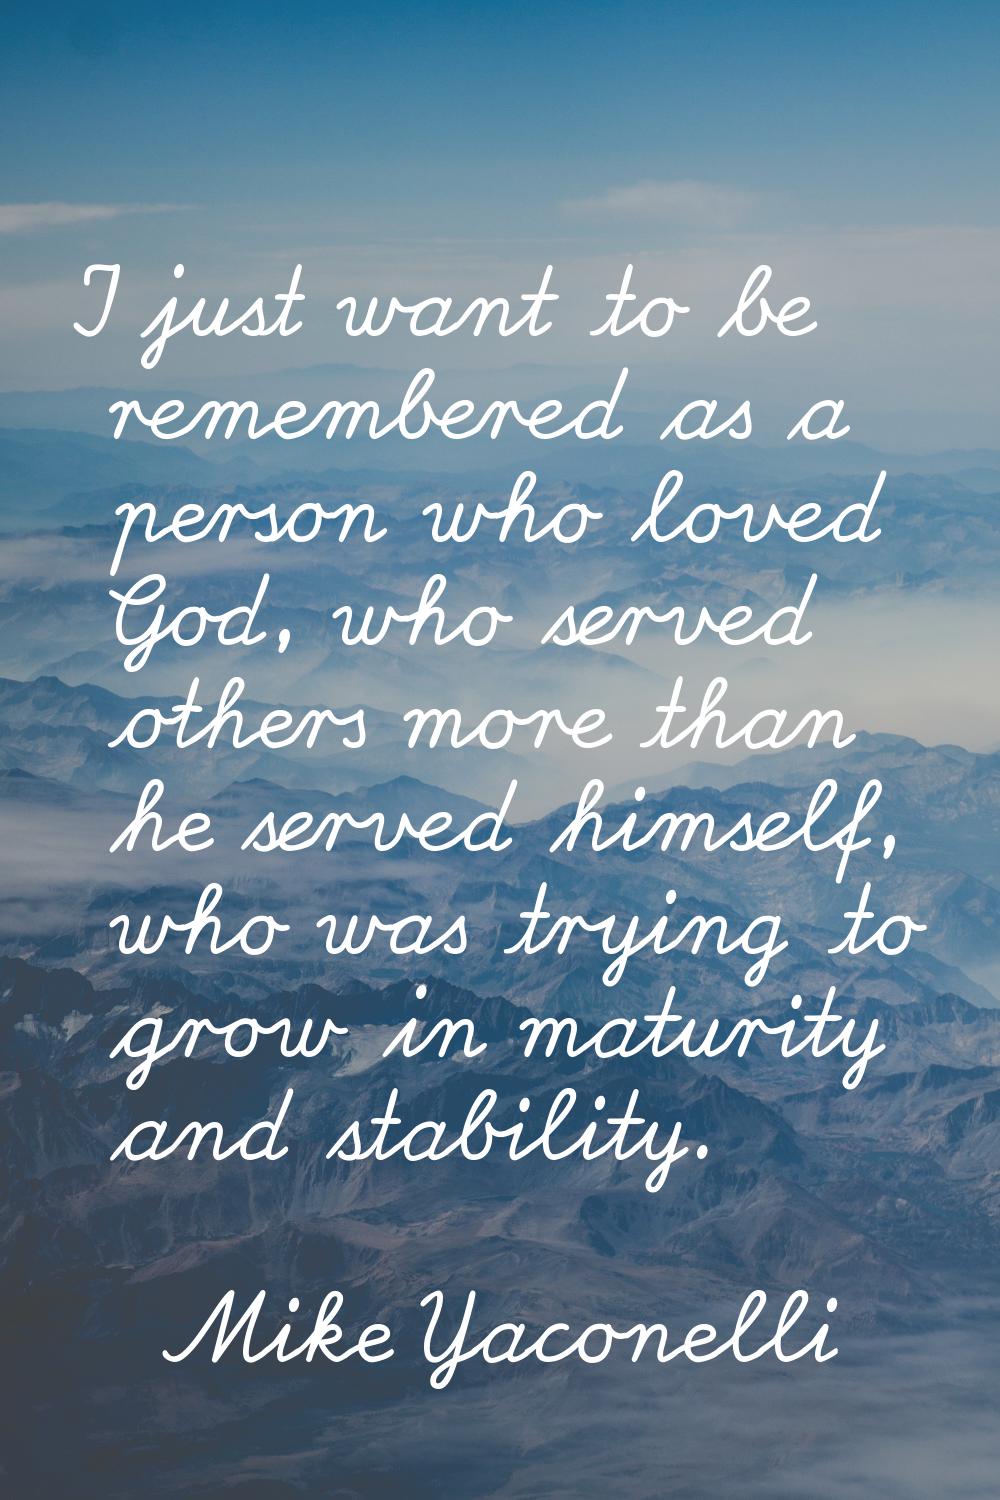 I just want to be remembered as a person who loved God, who served others more than he served himse